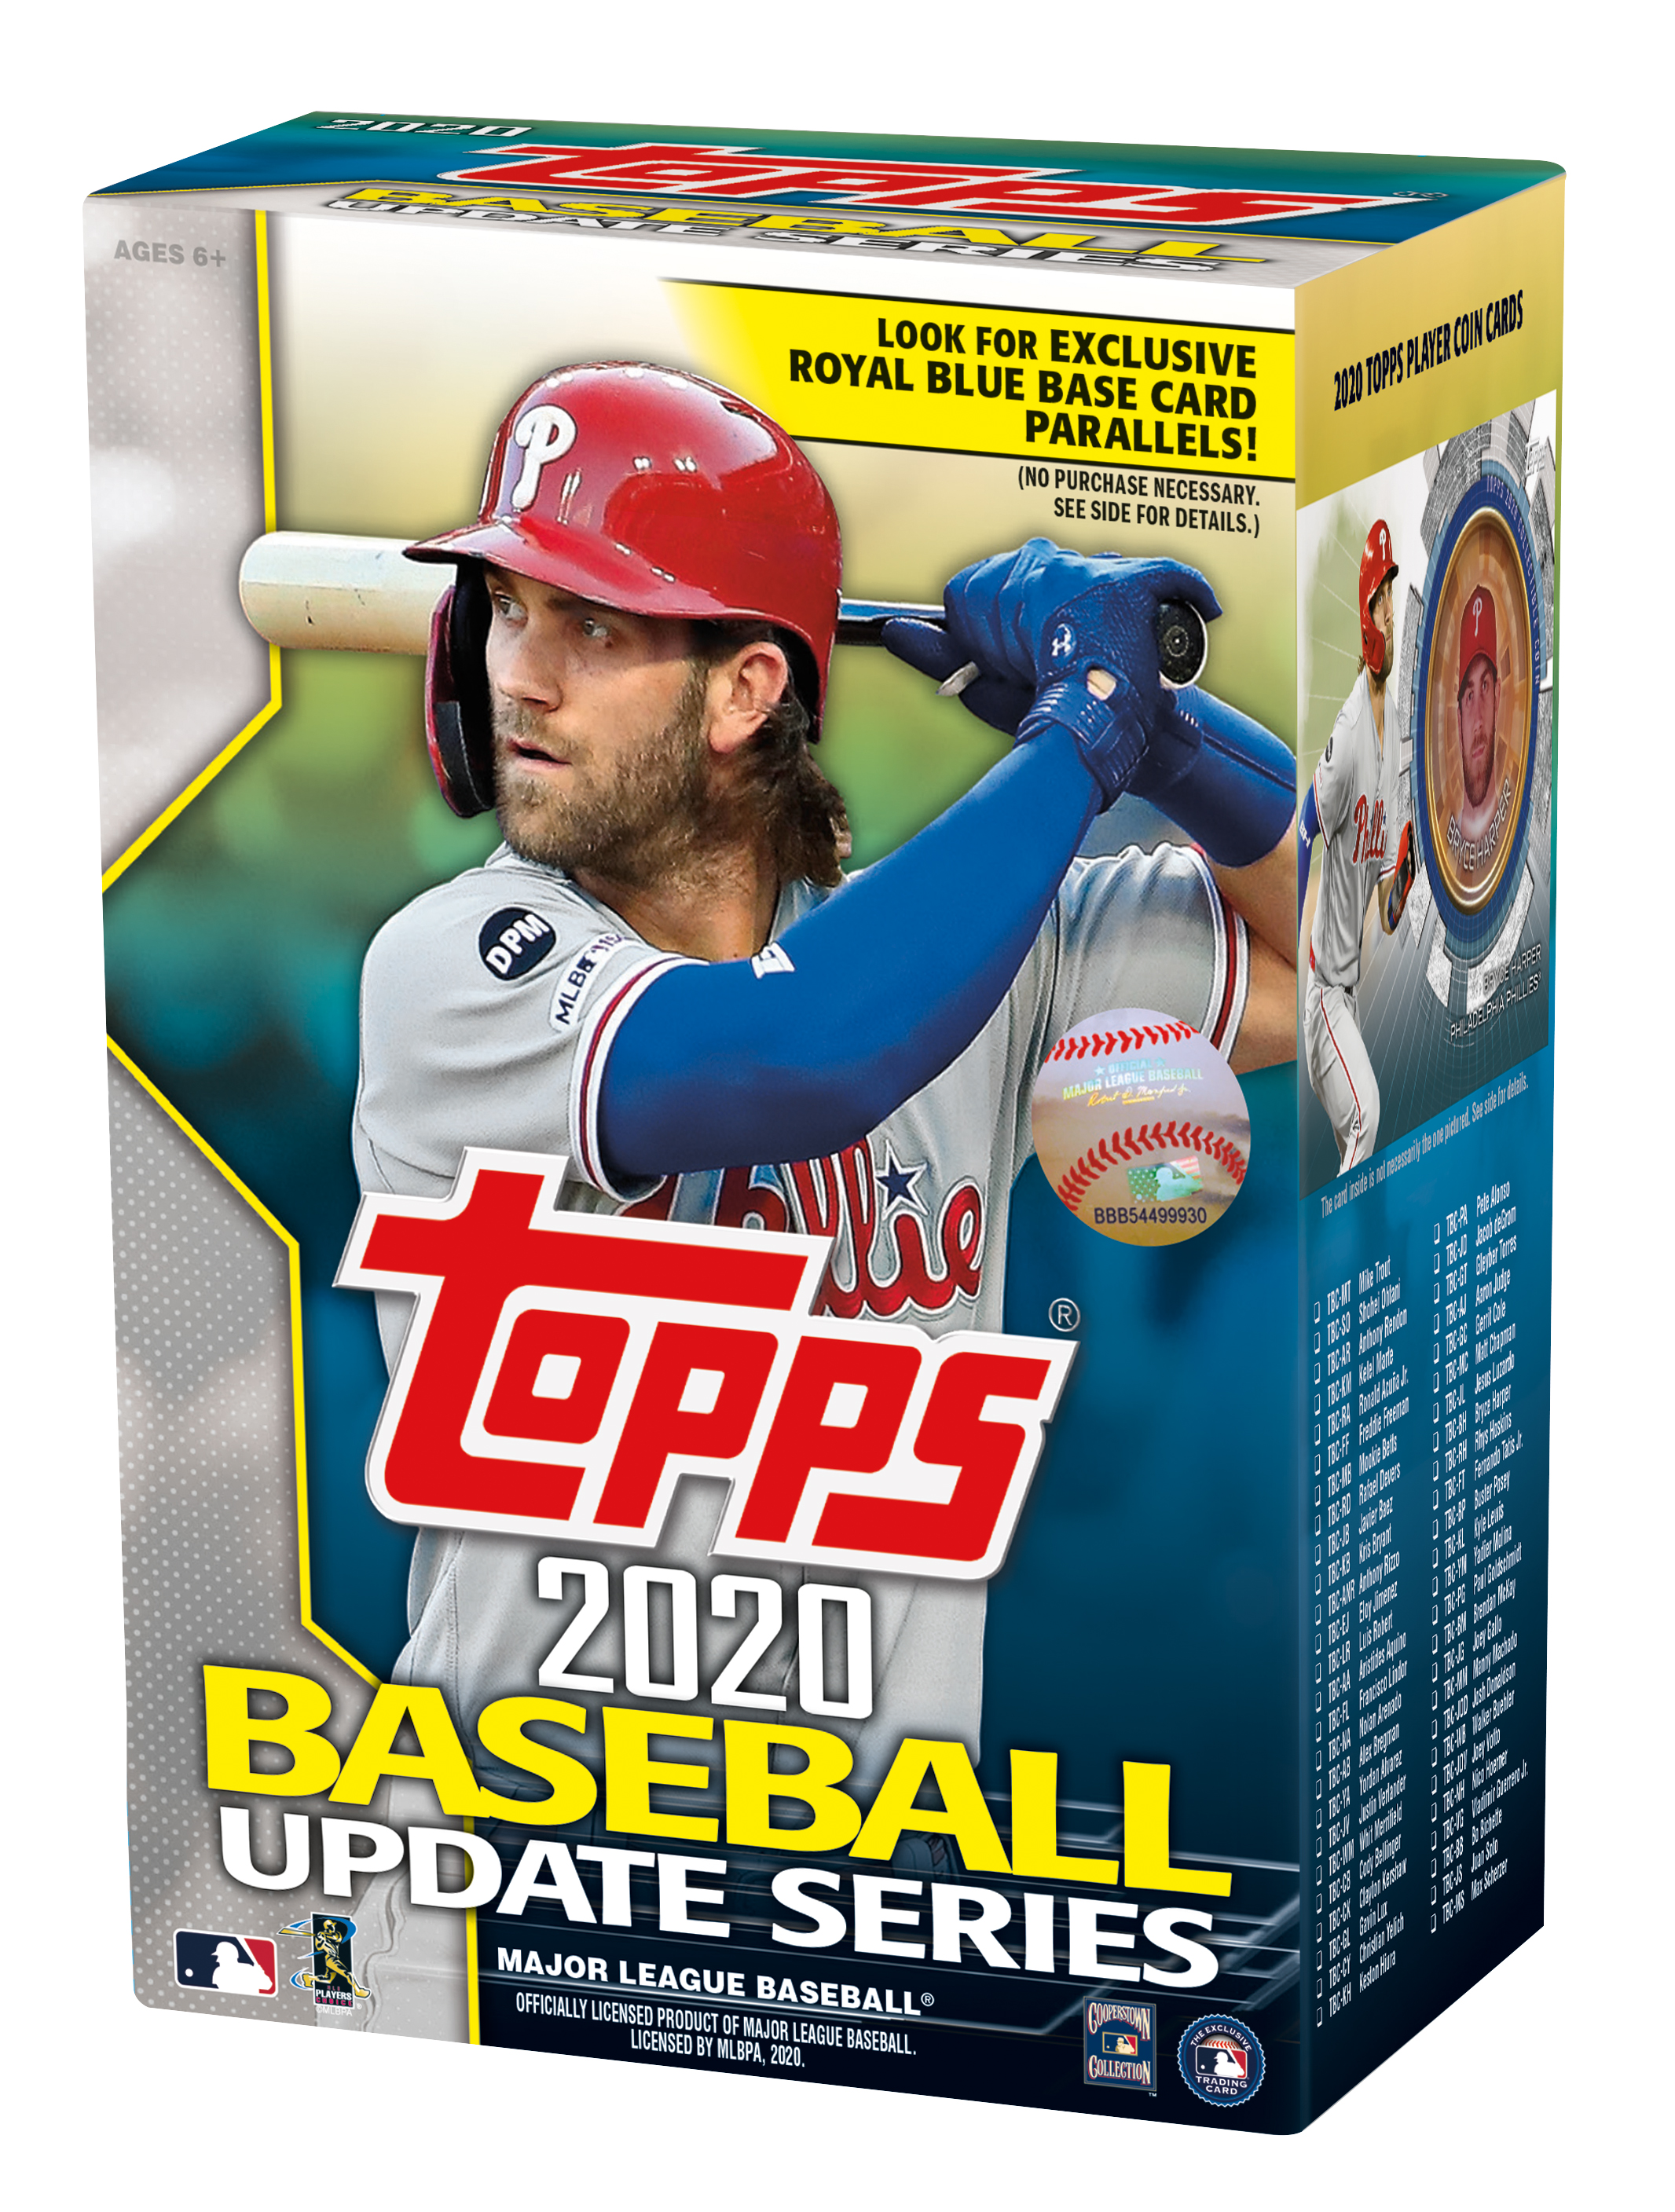 2020 Topps Baseball Rookie Cards Guide and Gallery